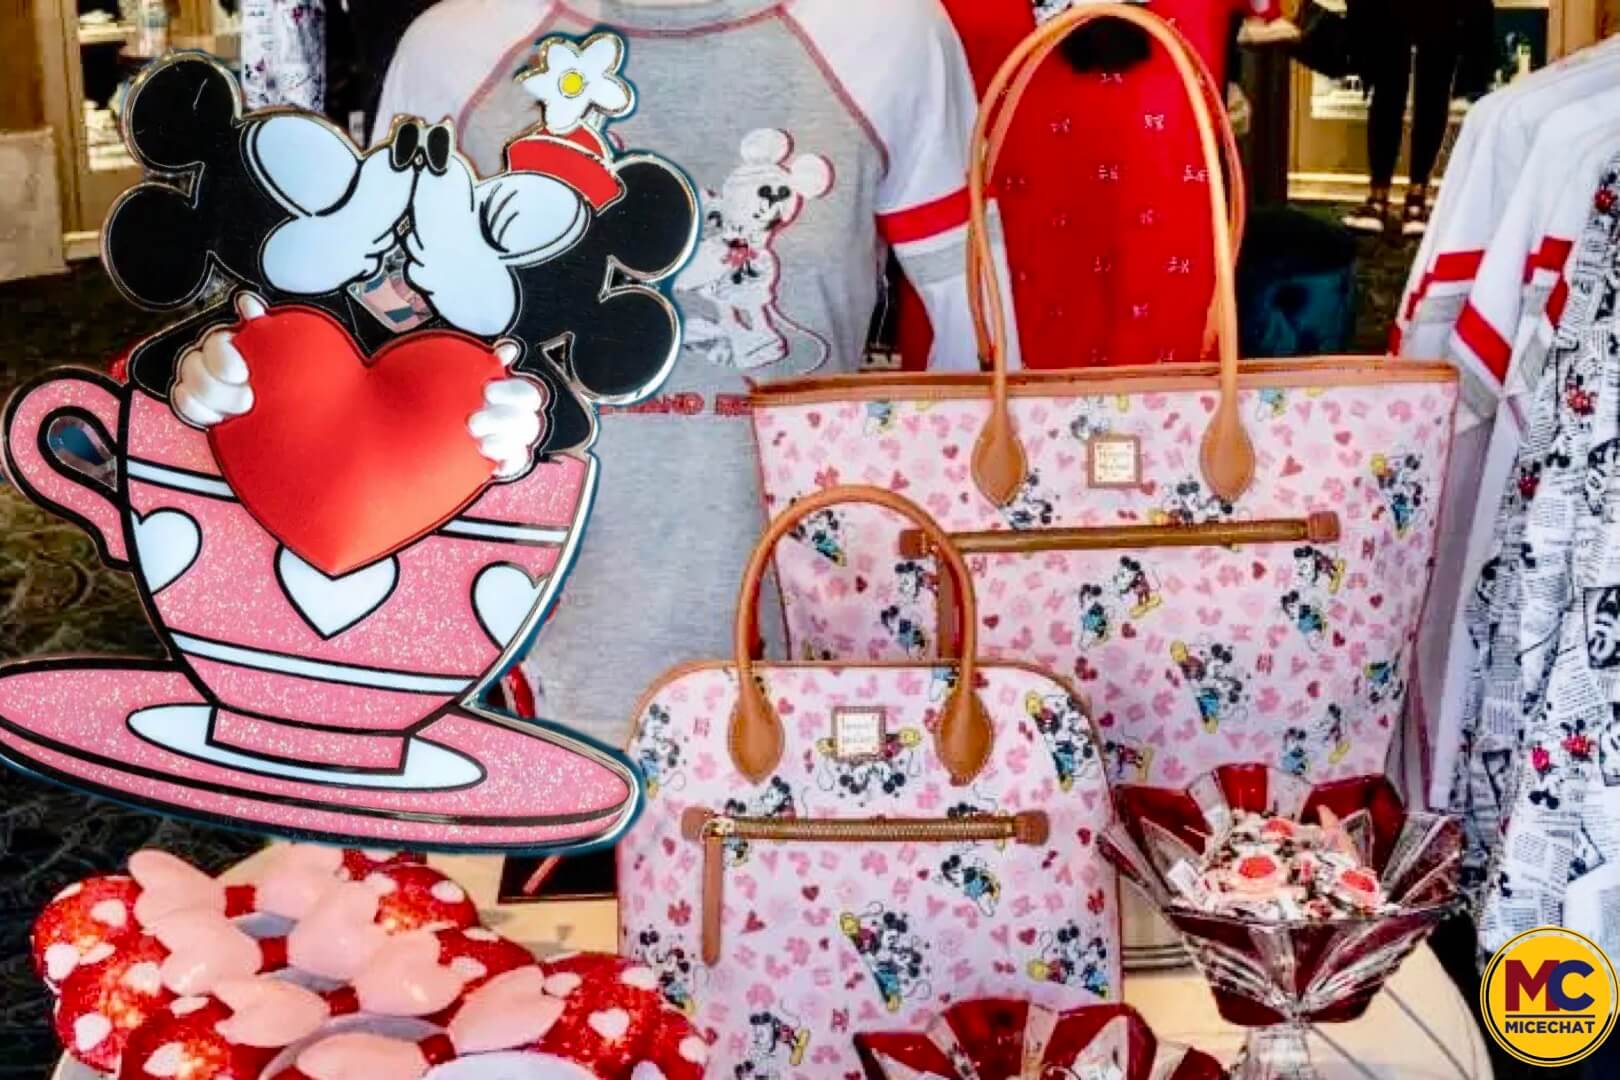 Great New Merch At Disneyland  New Ears, Dooney & Bourke Bags, And More 